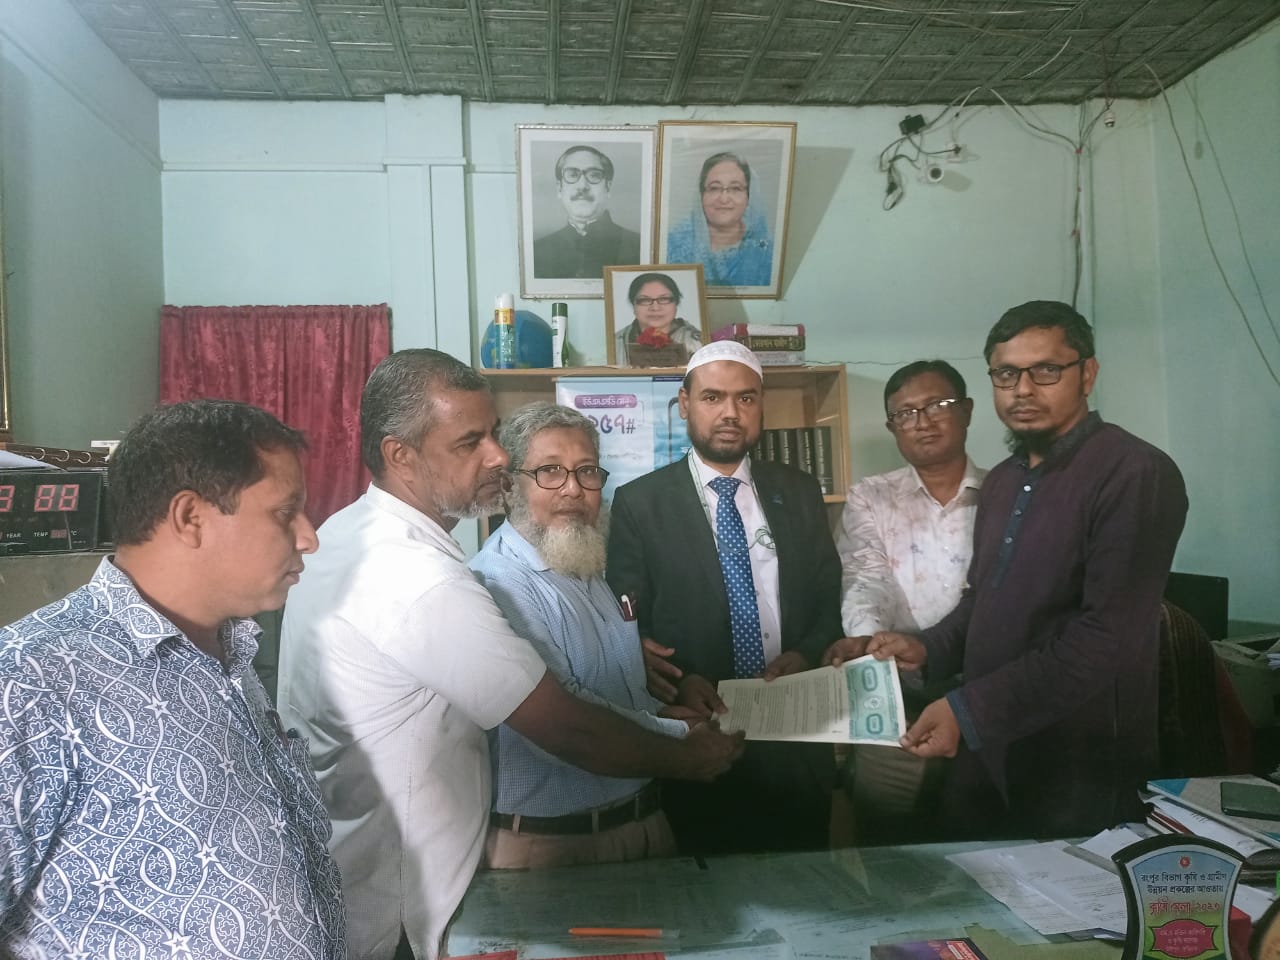 To collect all fees for students through FirstCash, First Security Islami Bank PLC collaborates with M.A. Matin Technical & Agricultural College, Ulipur, Kurigram.